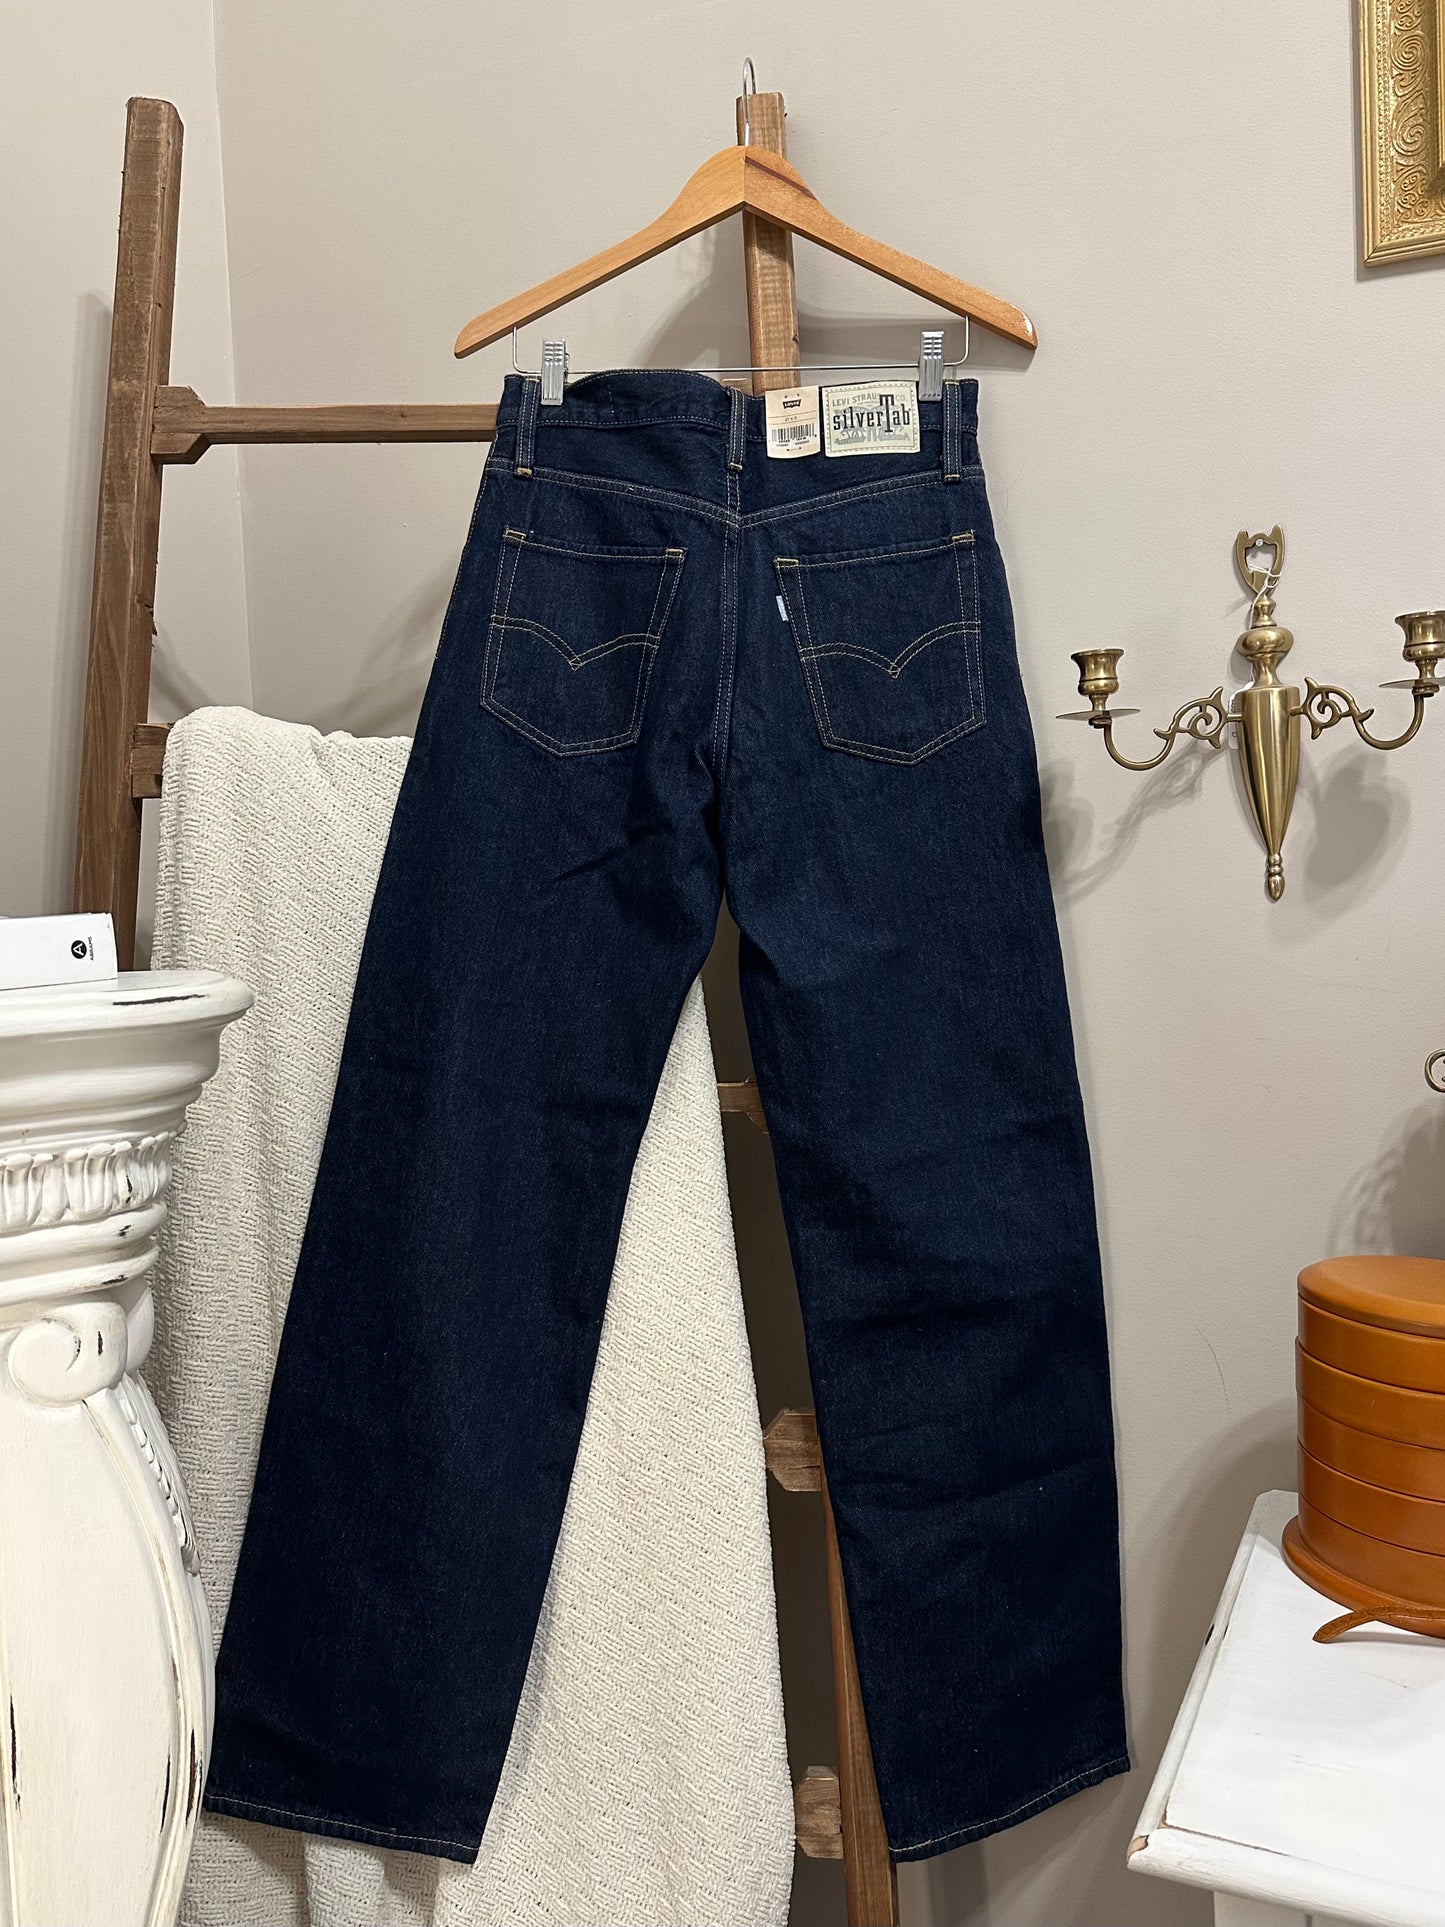 SilverTab Levi’s Baggy Jeans